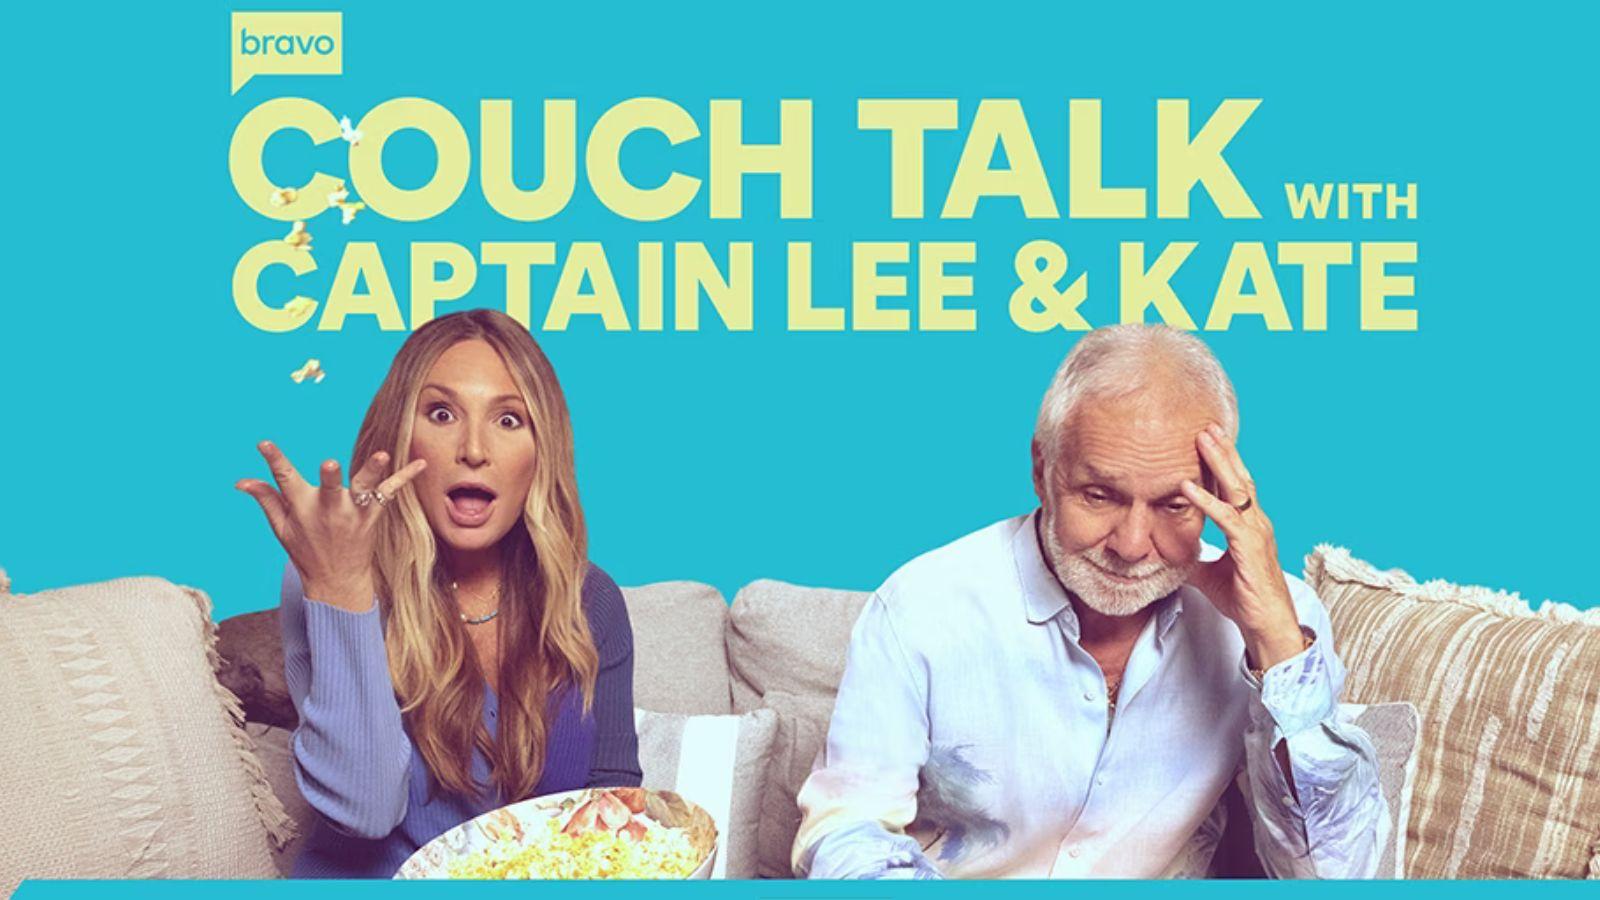 Captain Lee and Kate Chastain from Below Deck